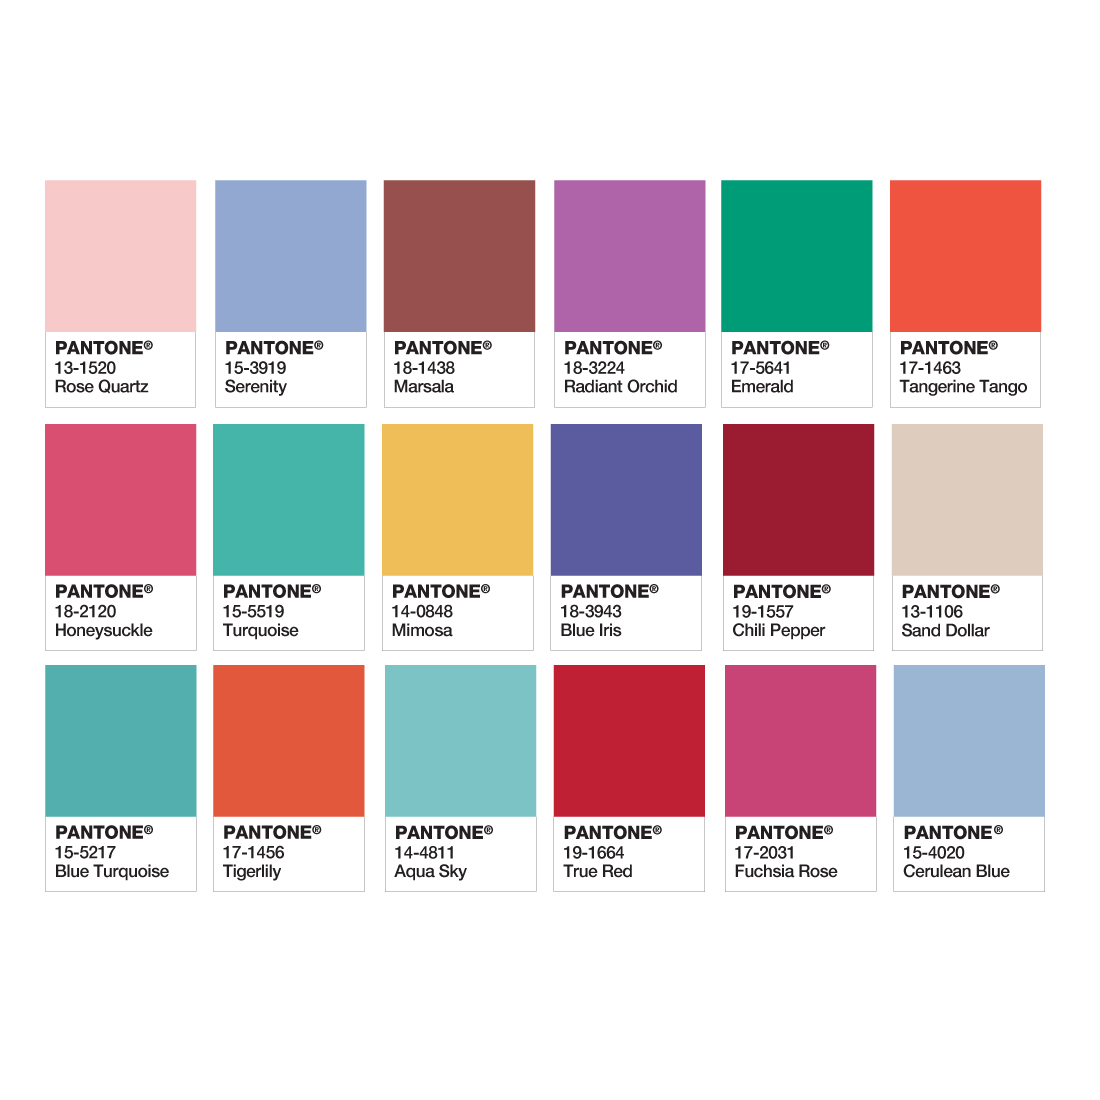 PANTONE COLORS OF THE YEAR 2016